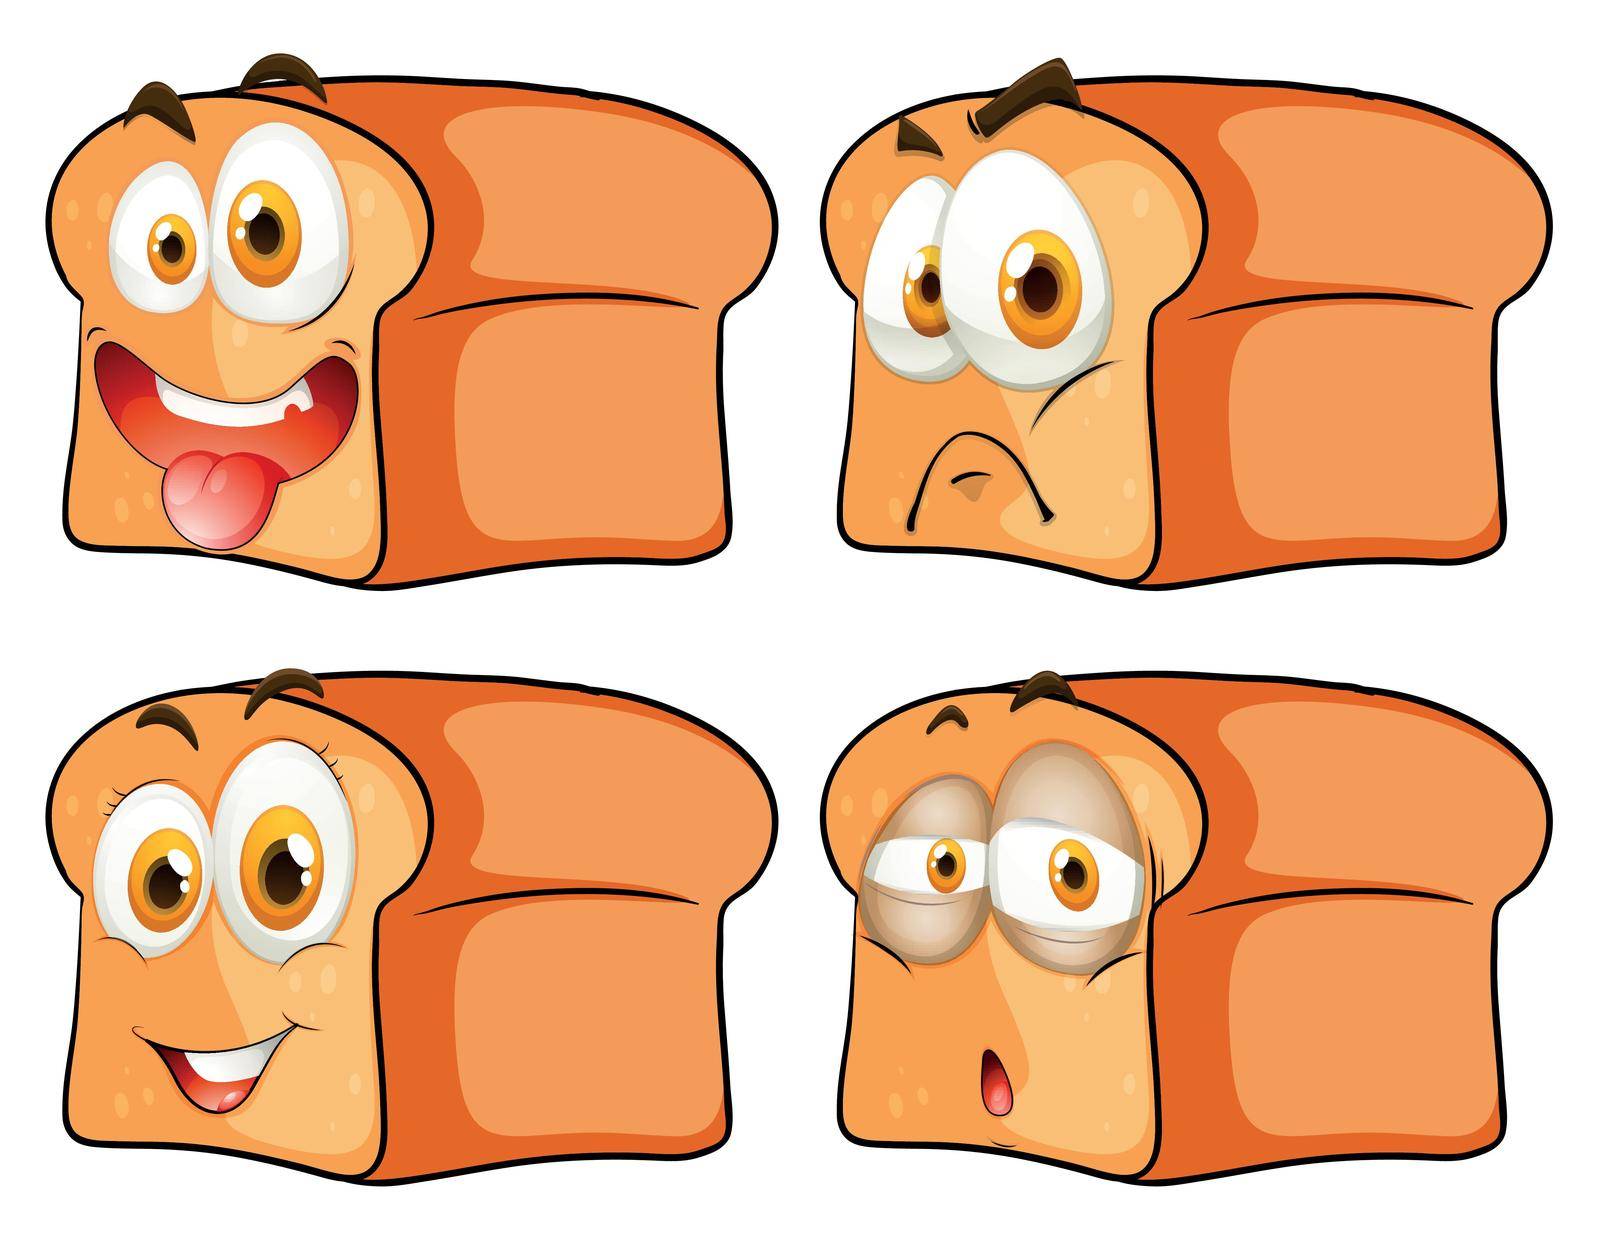 Bread with facial expression illustration